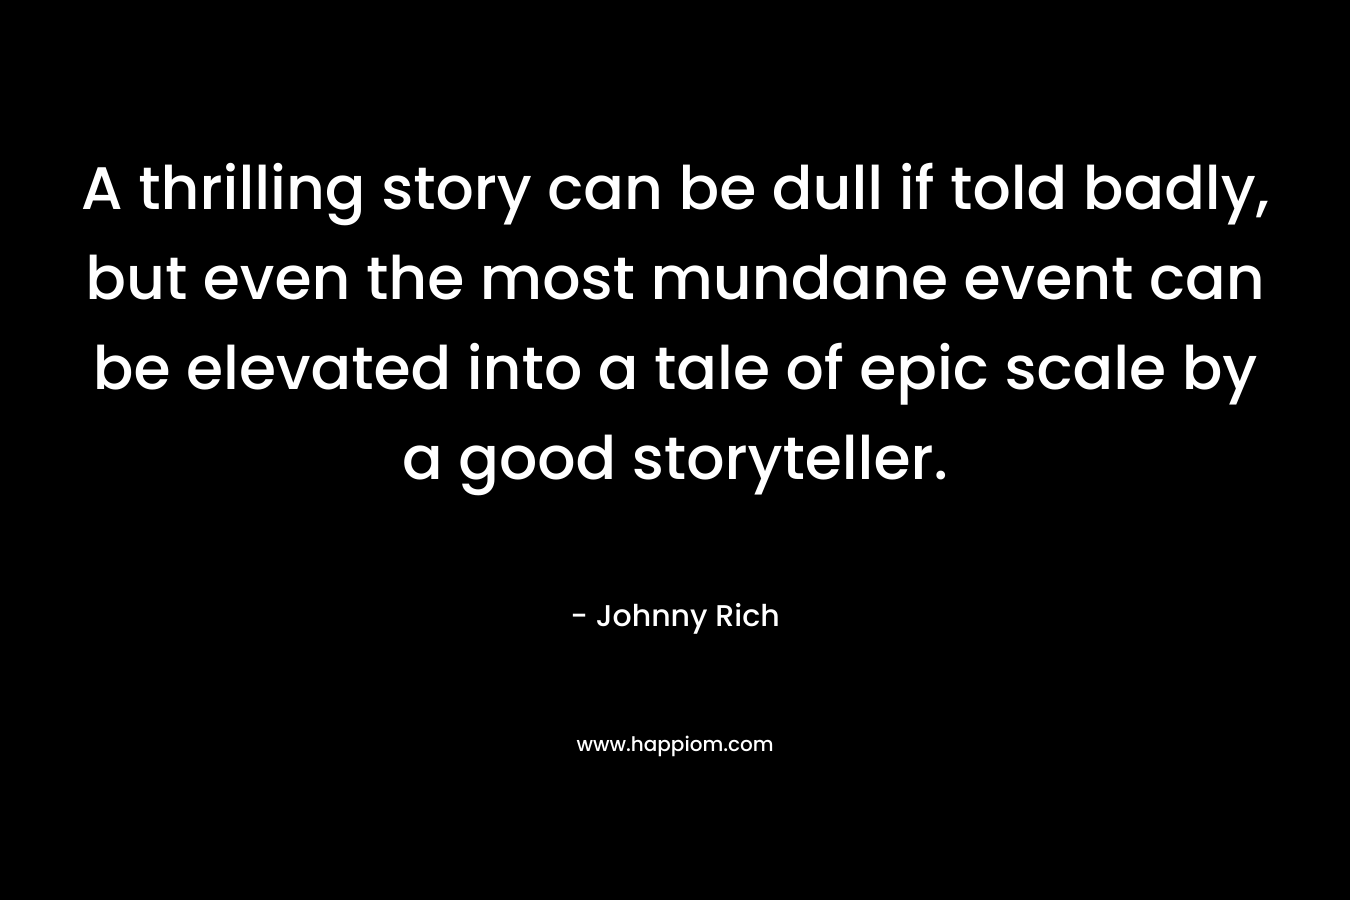 A thrilling story can be dull if told badly, but even the most mundane event can be elevated into a tale of epic scale by a good storyteller. – Johnny Rich